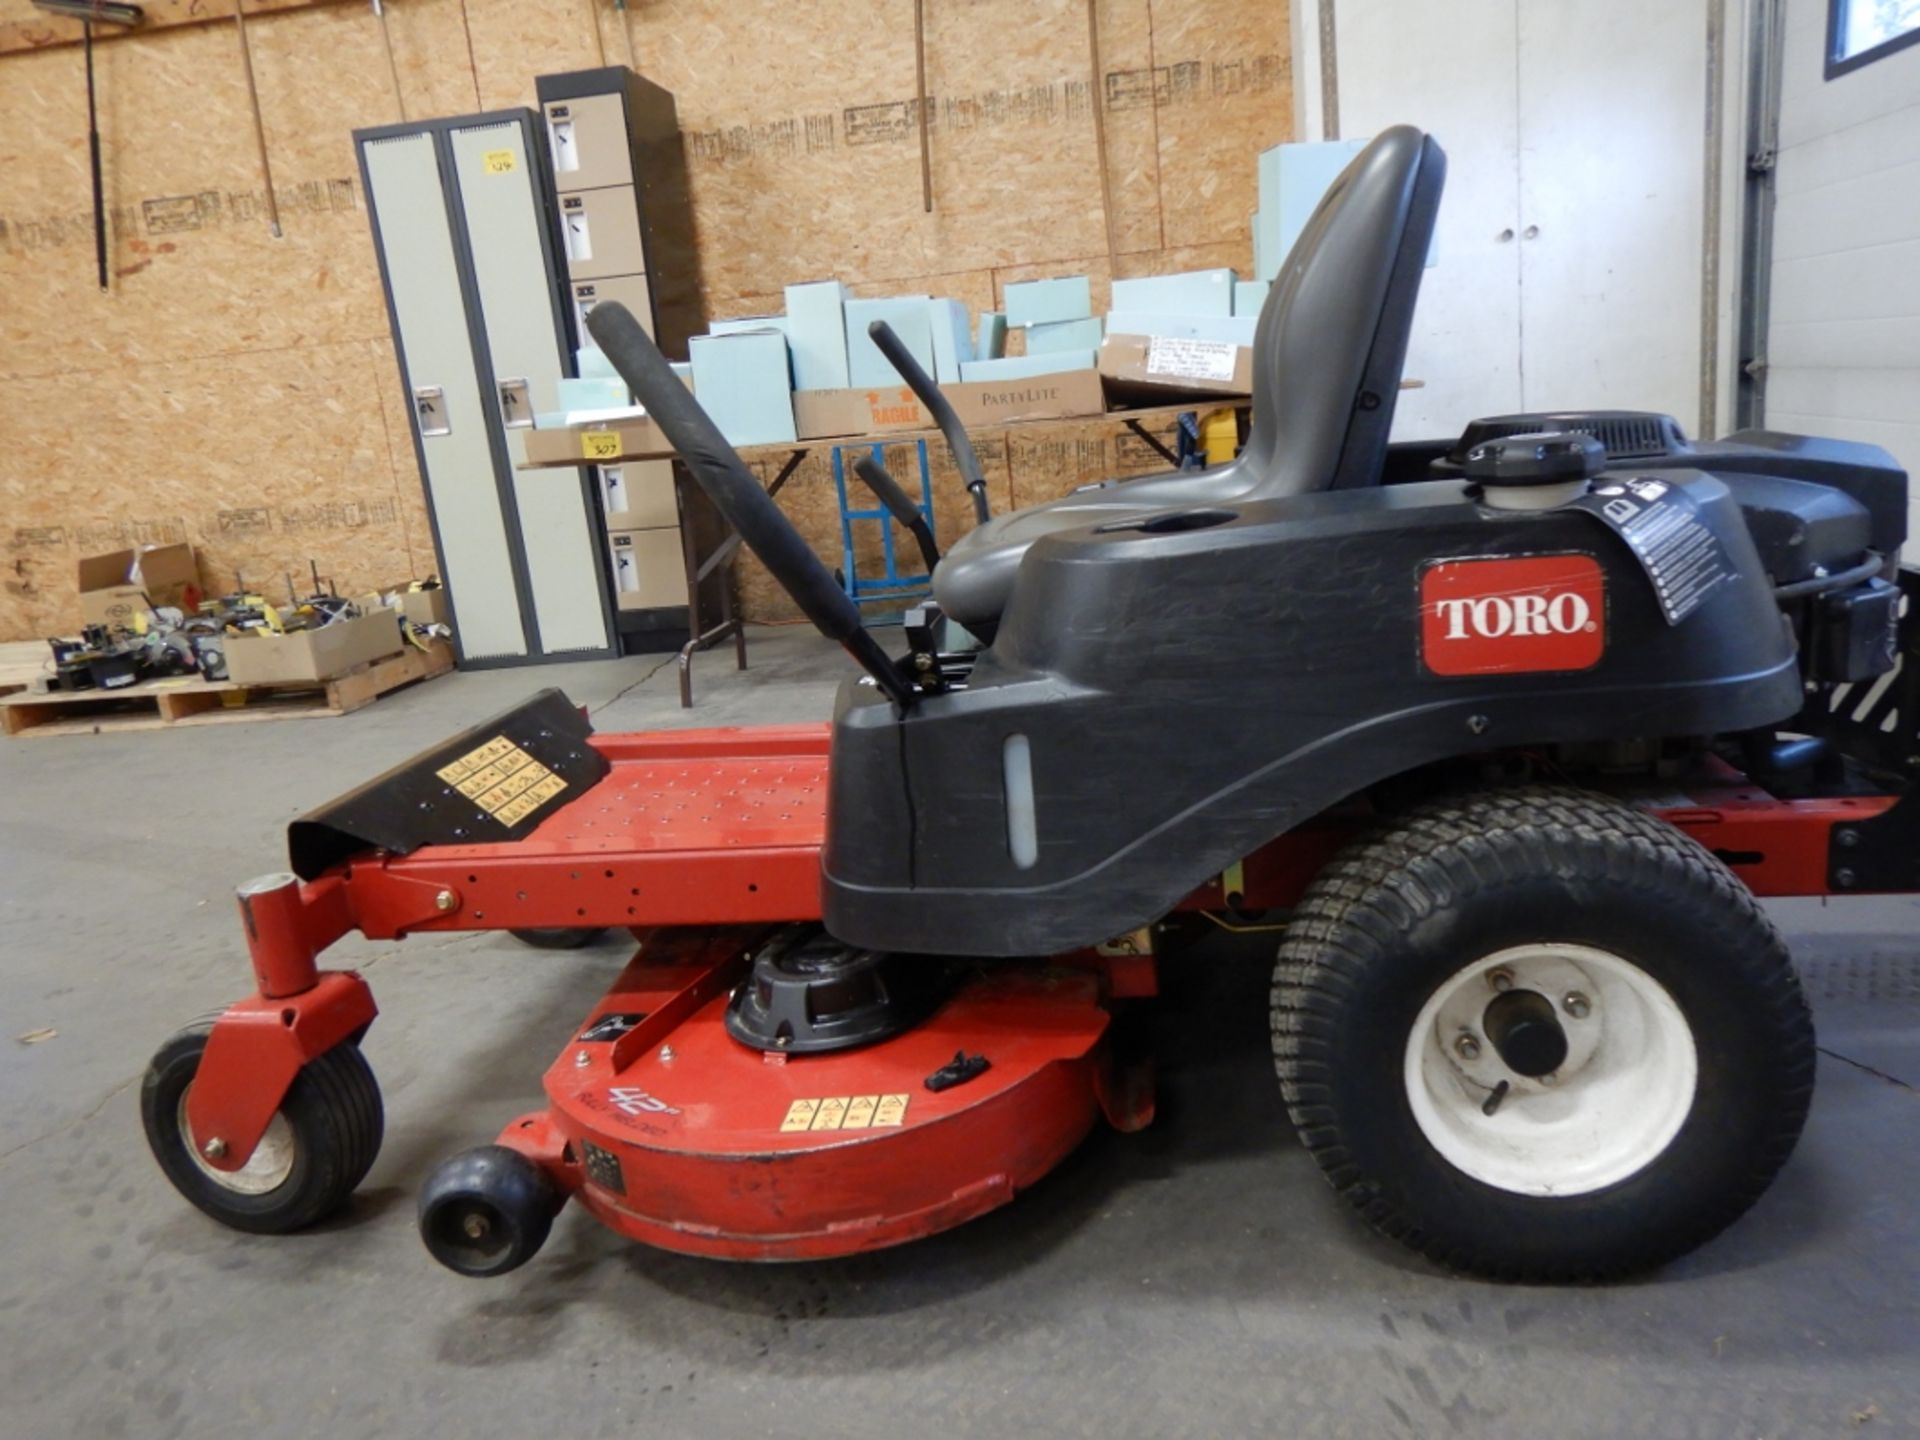 2018 TORO TIME CUTTER MX4200 RIDING MOWER, W/ 42" MOWER, SMART SPEED CONTROL - GREAT CONDITION